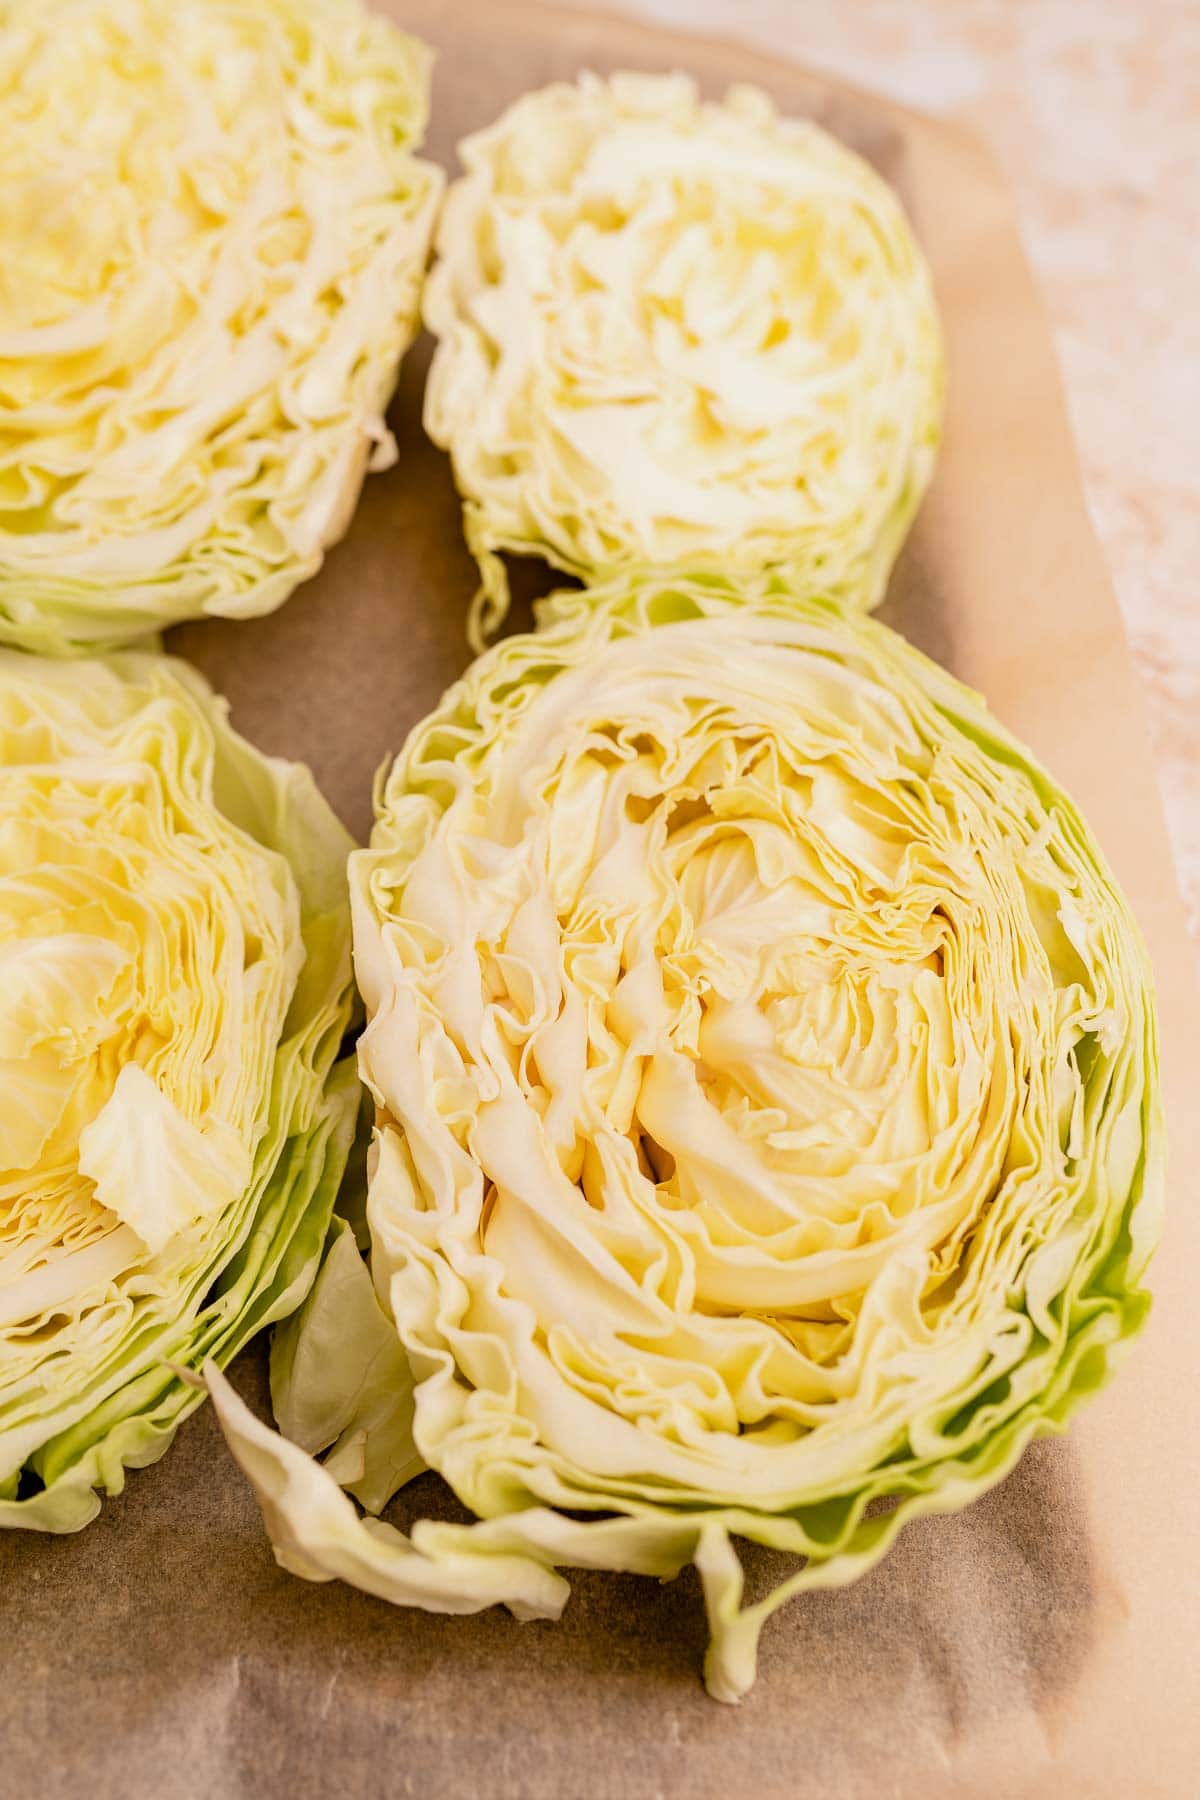 Halved cabbage steaks on a cutting board showing their intricate layers and textures, with focus on the crisp, fresh details of the cut surfaces.